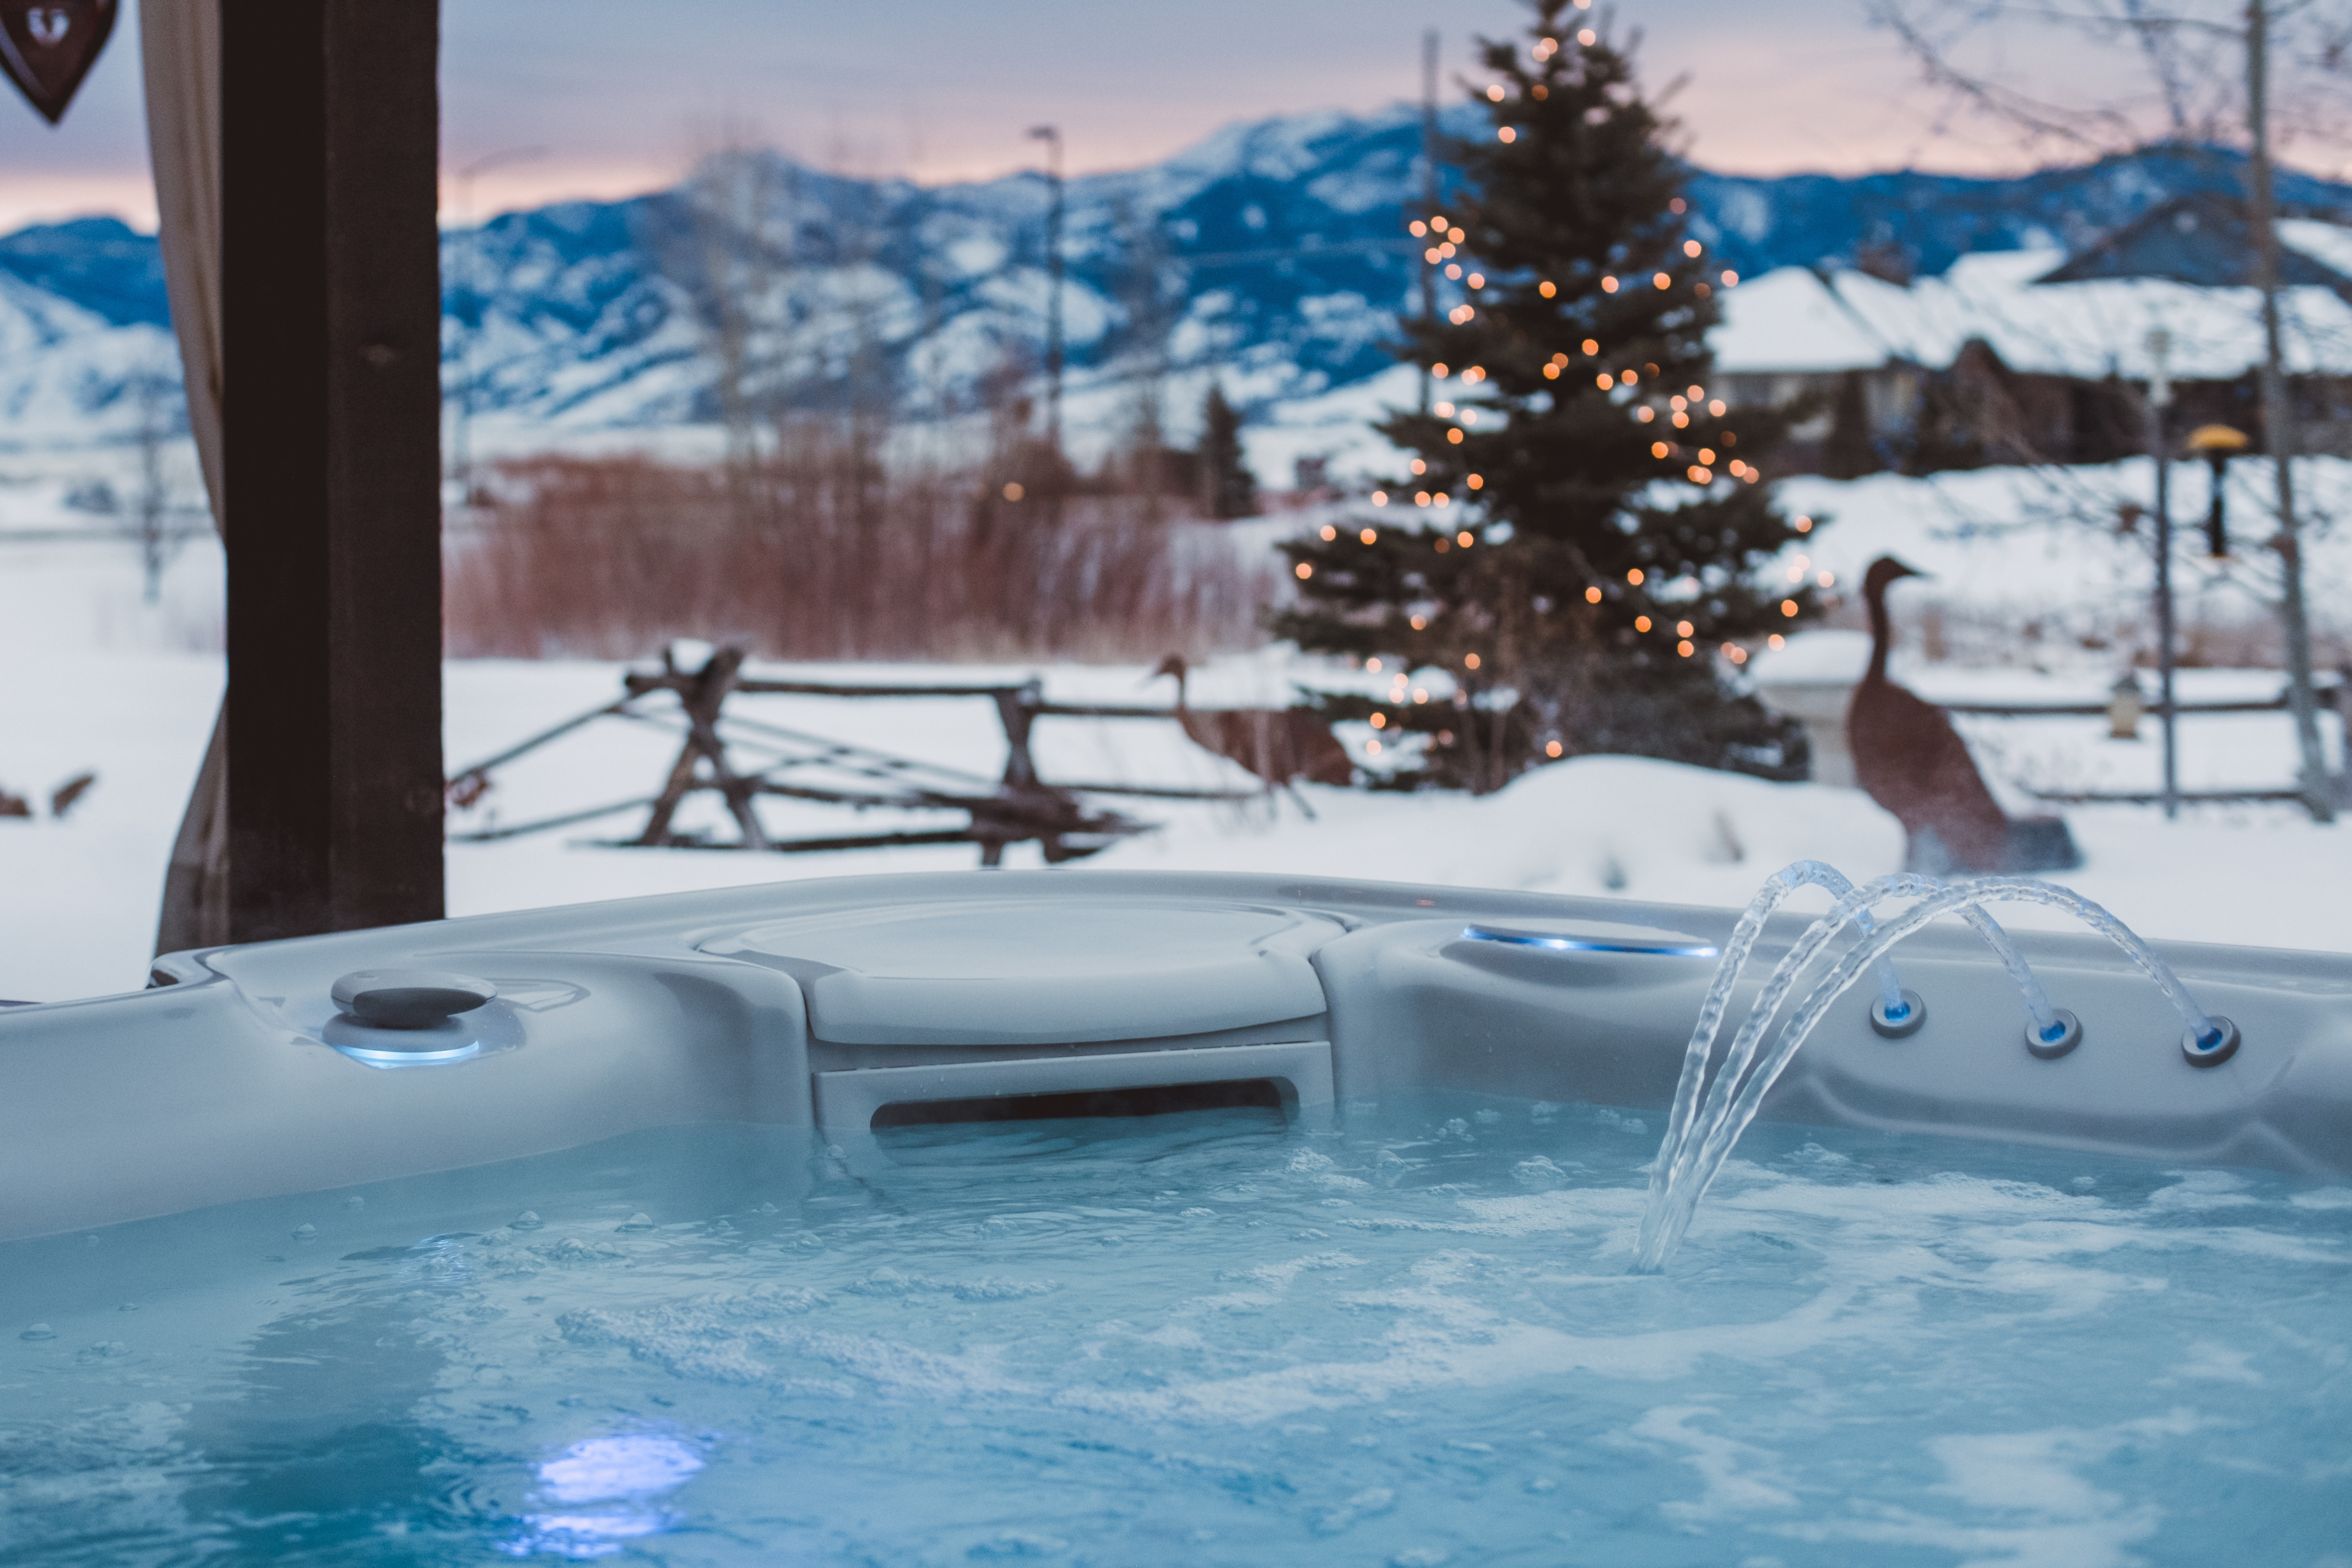 Treat Yourself to a Warm, Comforting Christmas With a New Hot Tub